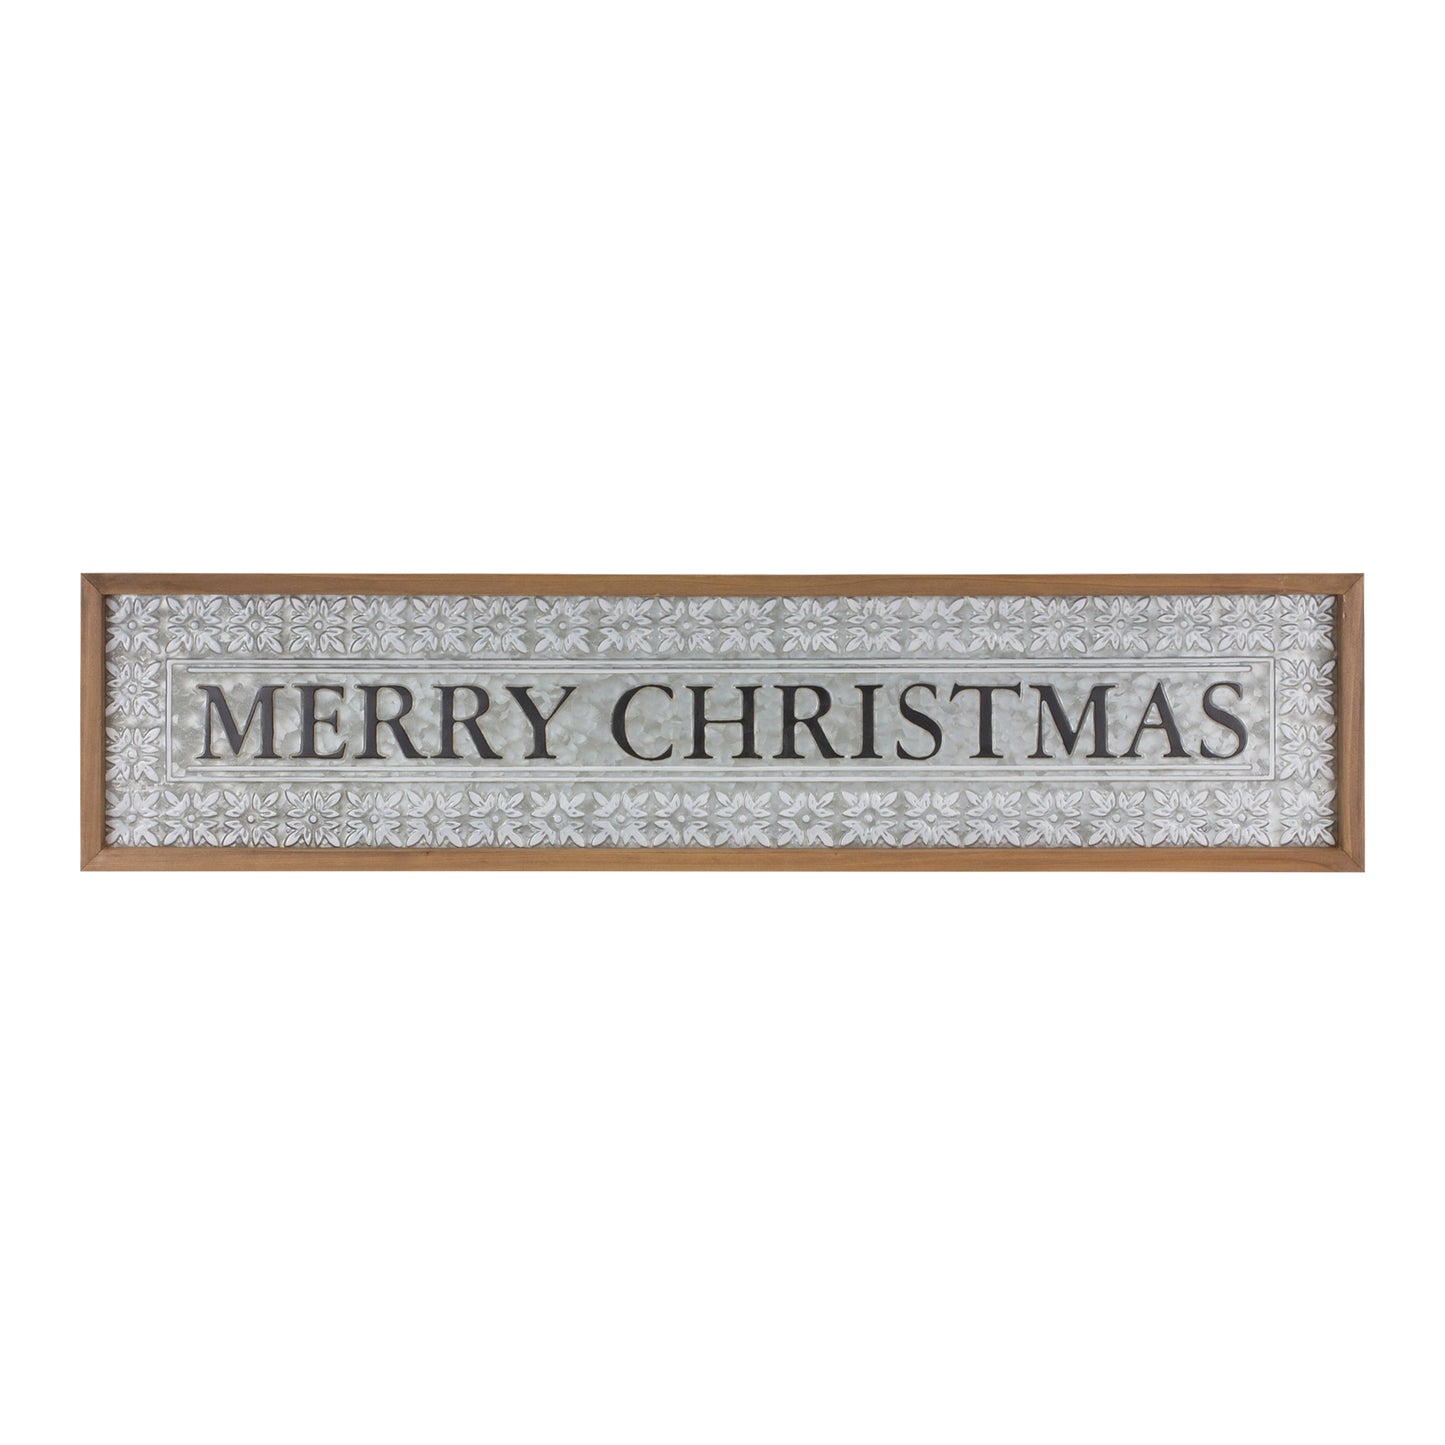 Ornate Metal Merry Christmas Sign 34"L